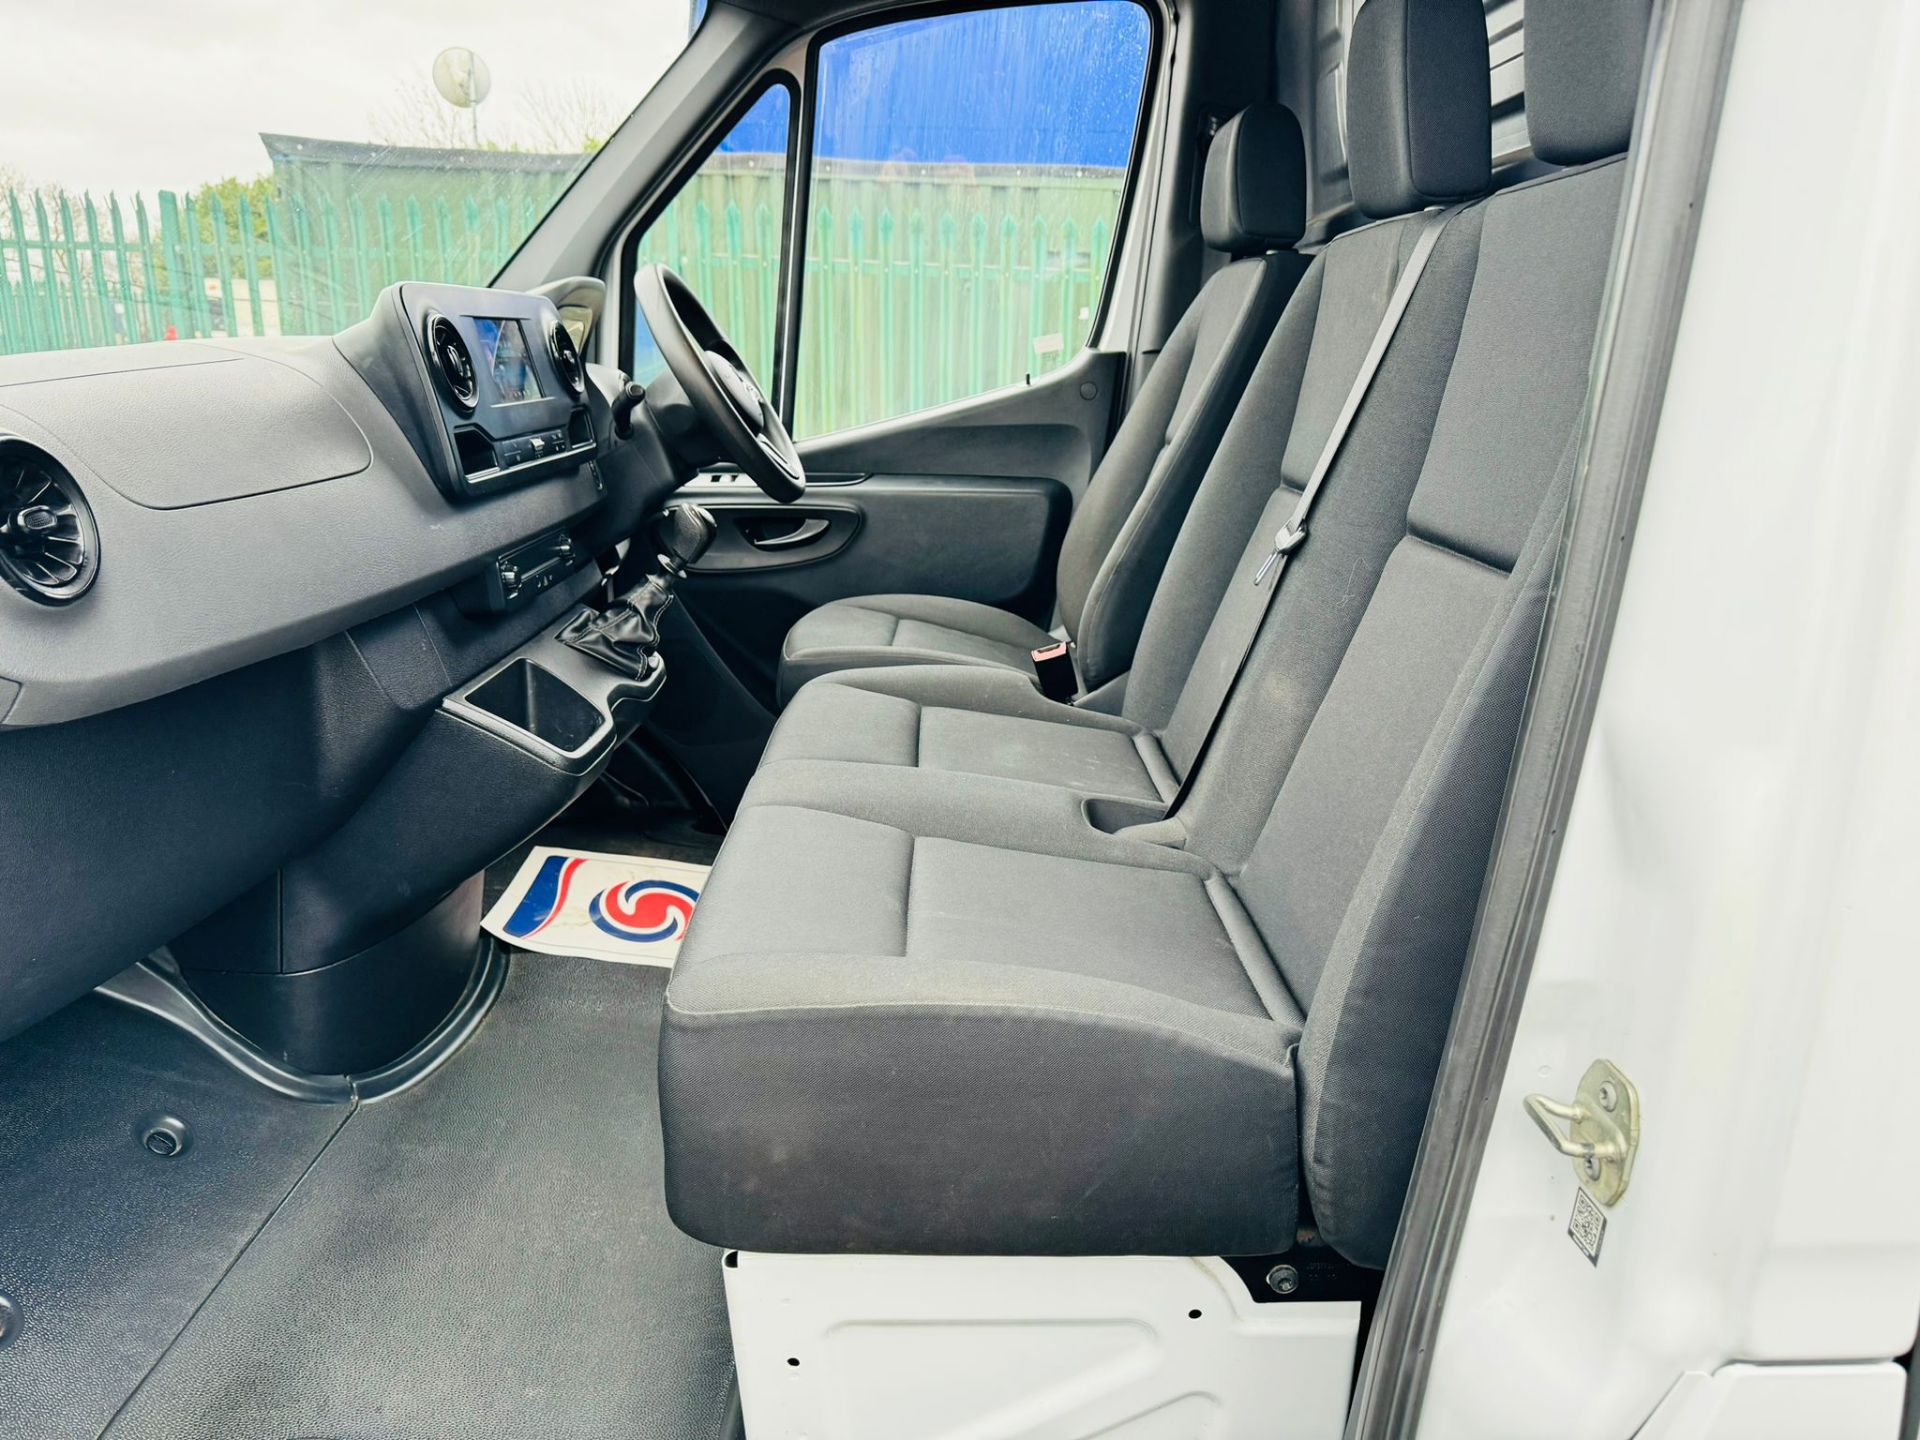 MERCEDES SPRINTER 314CDI MWB HI ROOF - 2019 19 Reg - 1 Owner From New - Euro 6 - NEW SHAPE!! - Image 3 of 8